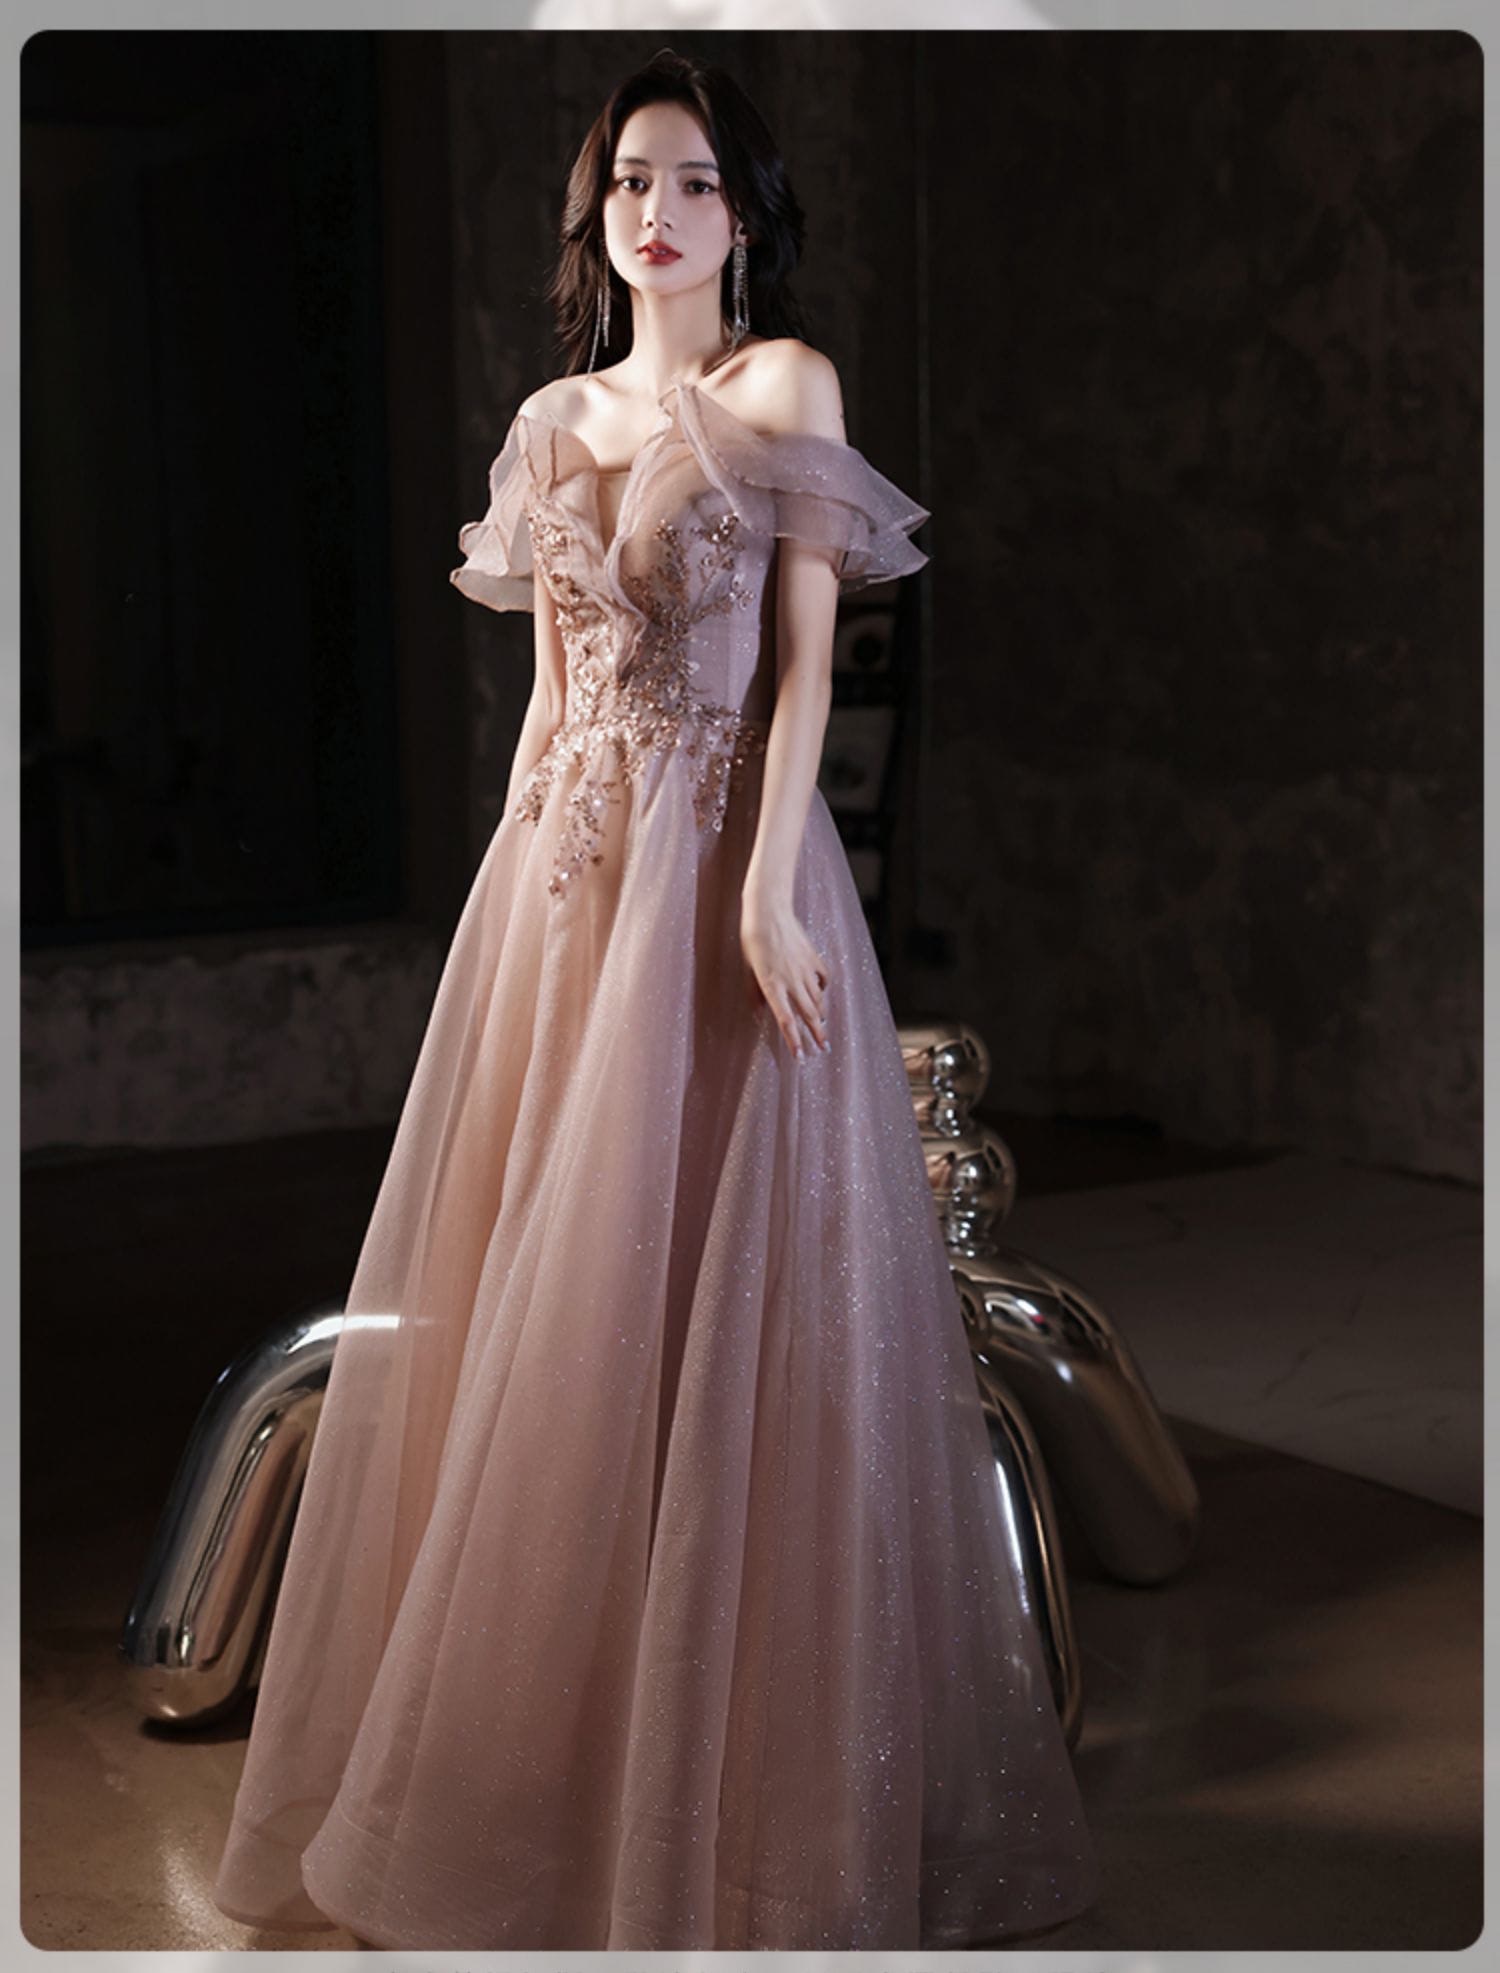 Sexy-Princess-Off-Shoulder-Pink-Cocktail-Prom-Formal-Maxi-Dress07